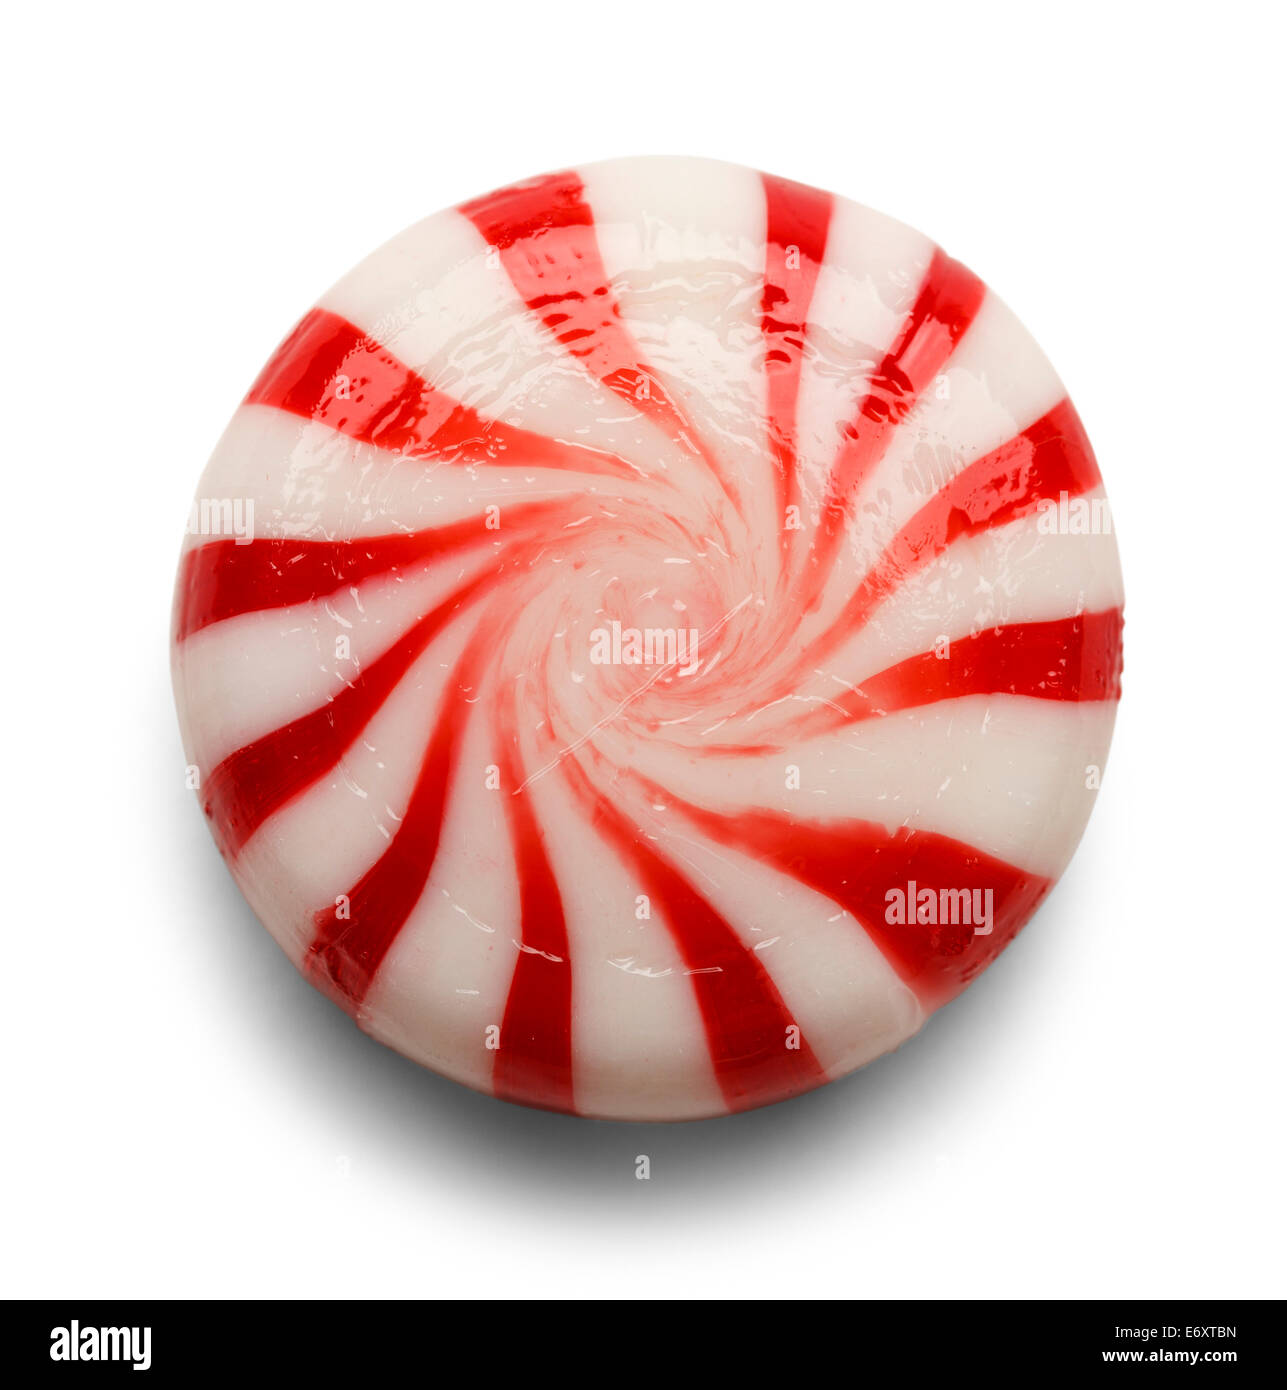 One Piece of Peppermint Candy Isolated on White Background. Stock Photo